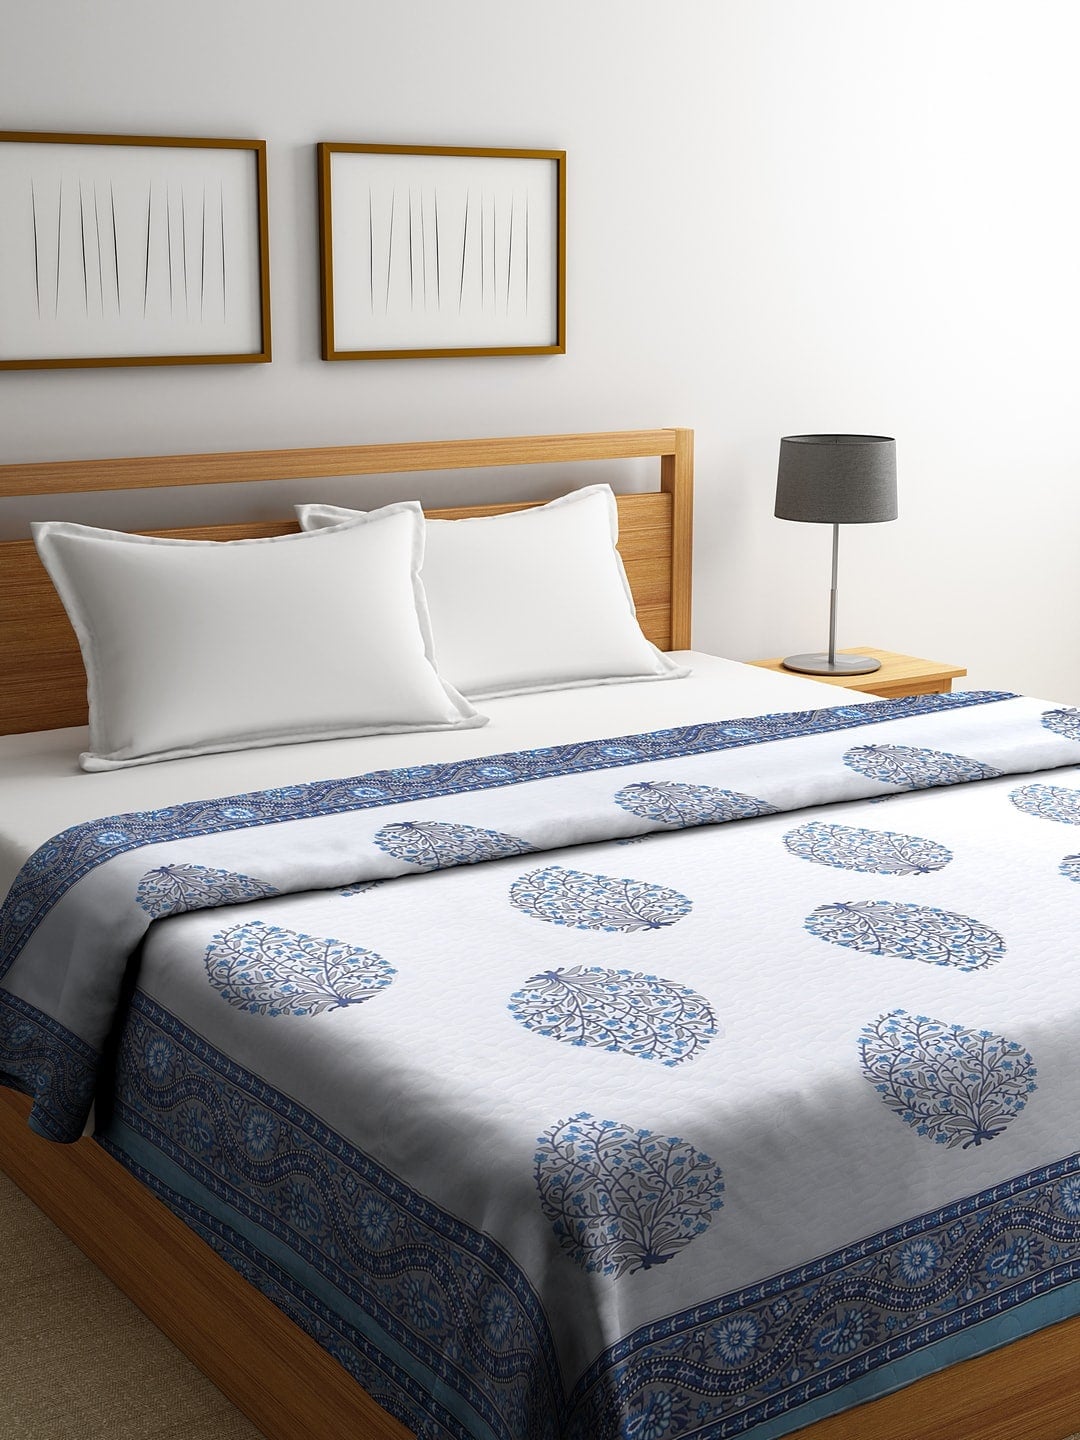 Rajasthan Decor White & Blue Ethnic Motifs AC Room 120 GSM Double Bed Quilt Price in India